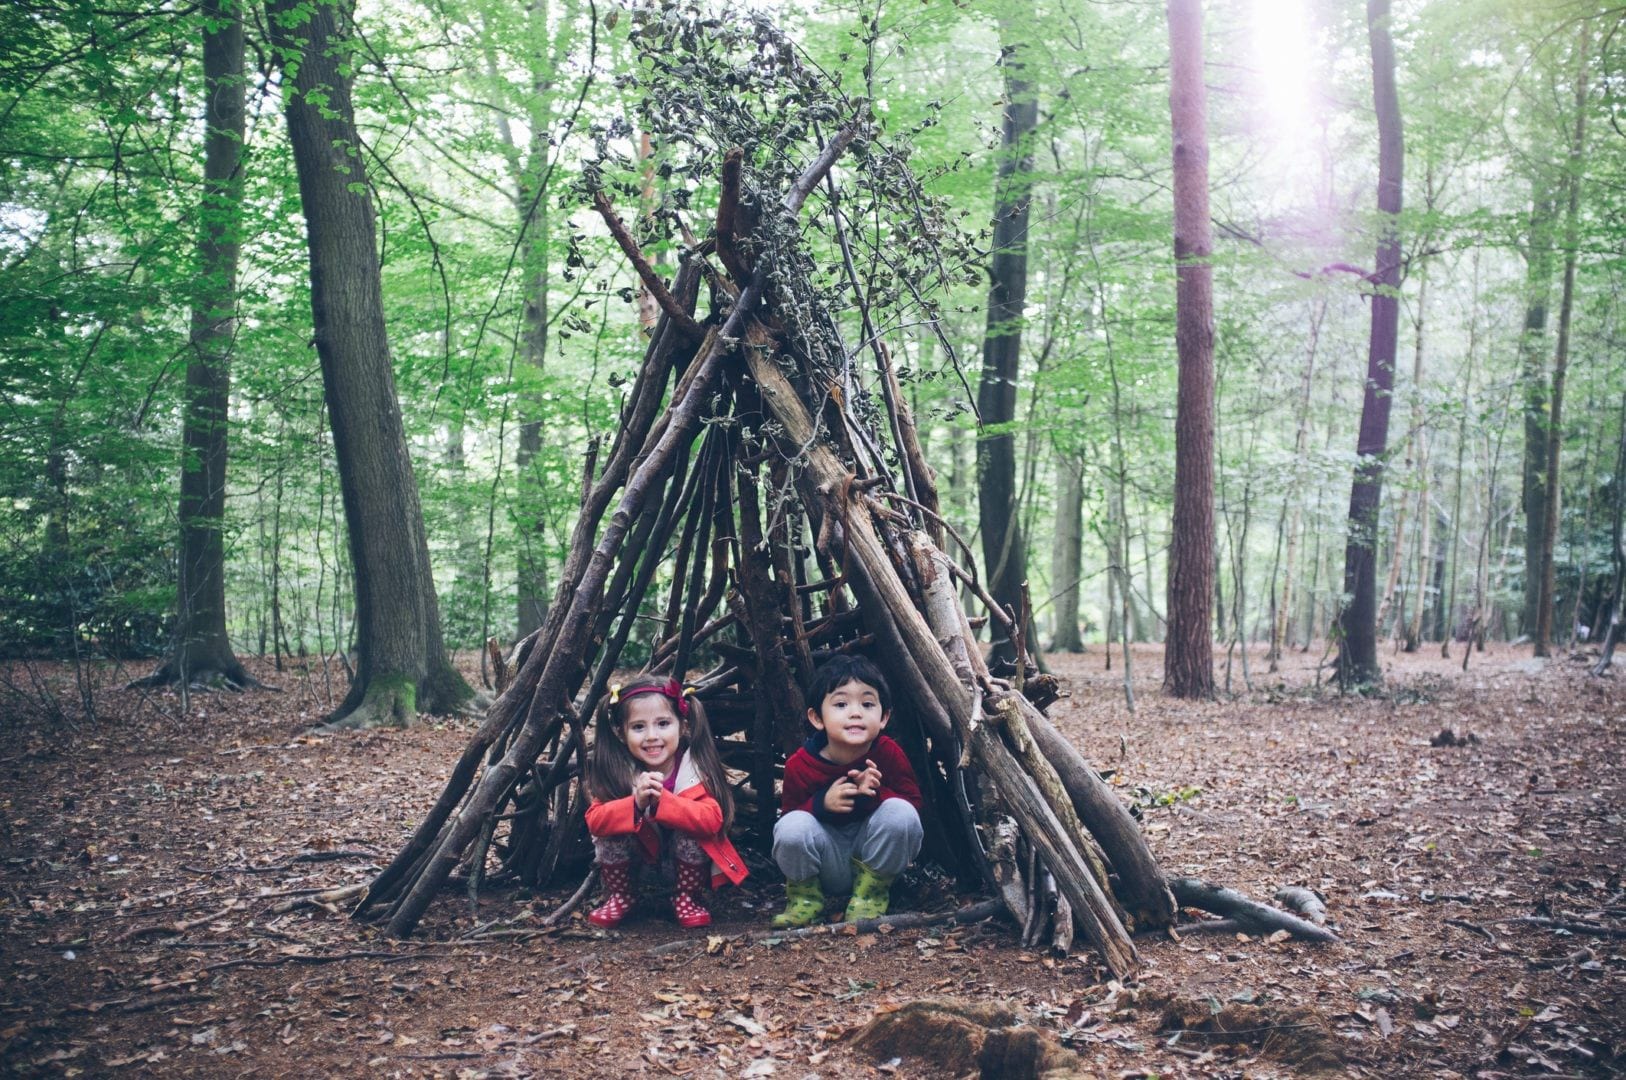 camping games for kids